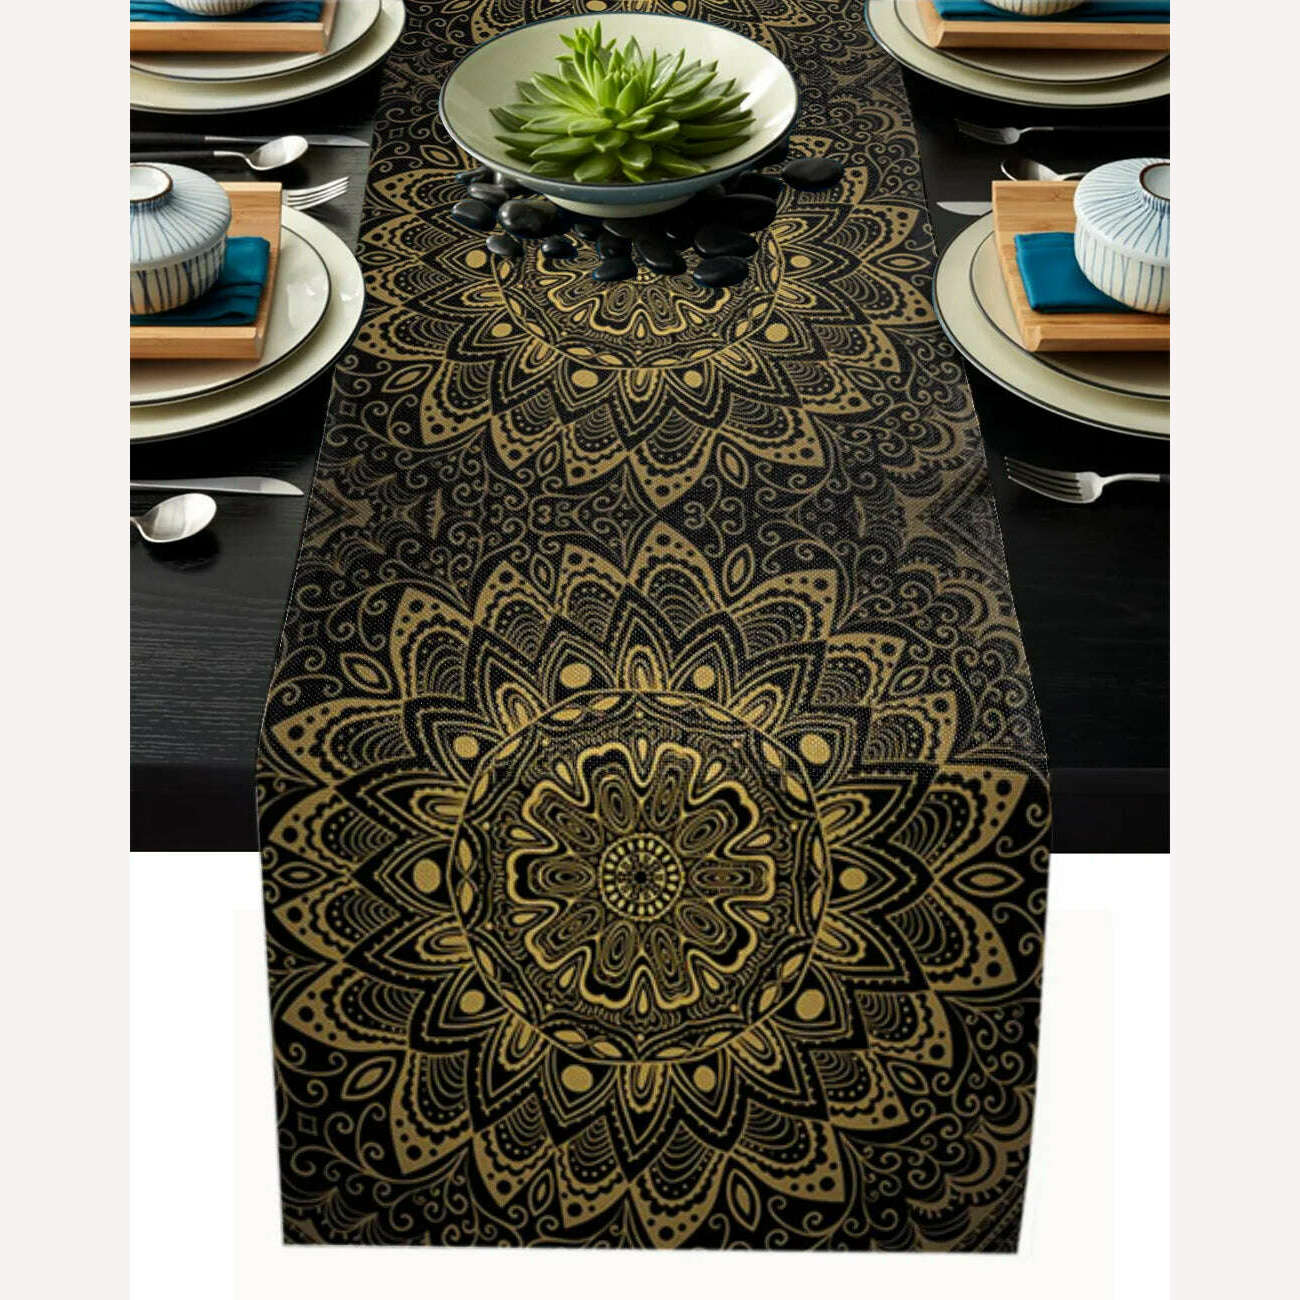 KIMLUD, Linen Burlap Table Runner Colorful Morocco Flowers Islam Arabesque Kitchen Table Runners Dinner Party Wedding Events Decor, LEX09704 / 180x33cm70x13inch, KIMLUD Womens Clothes